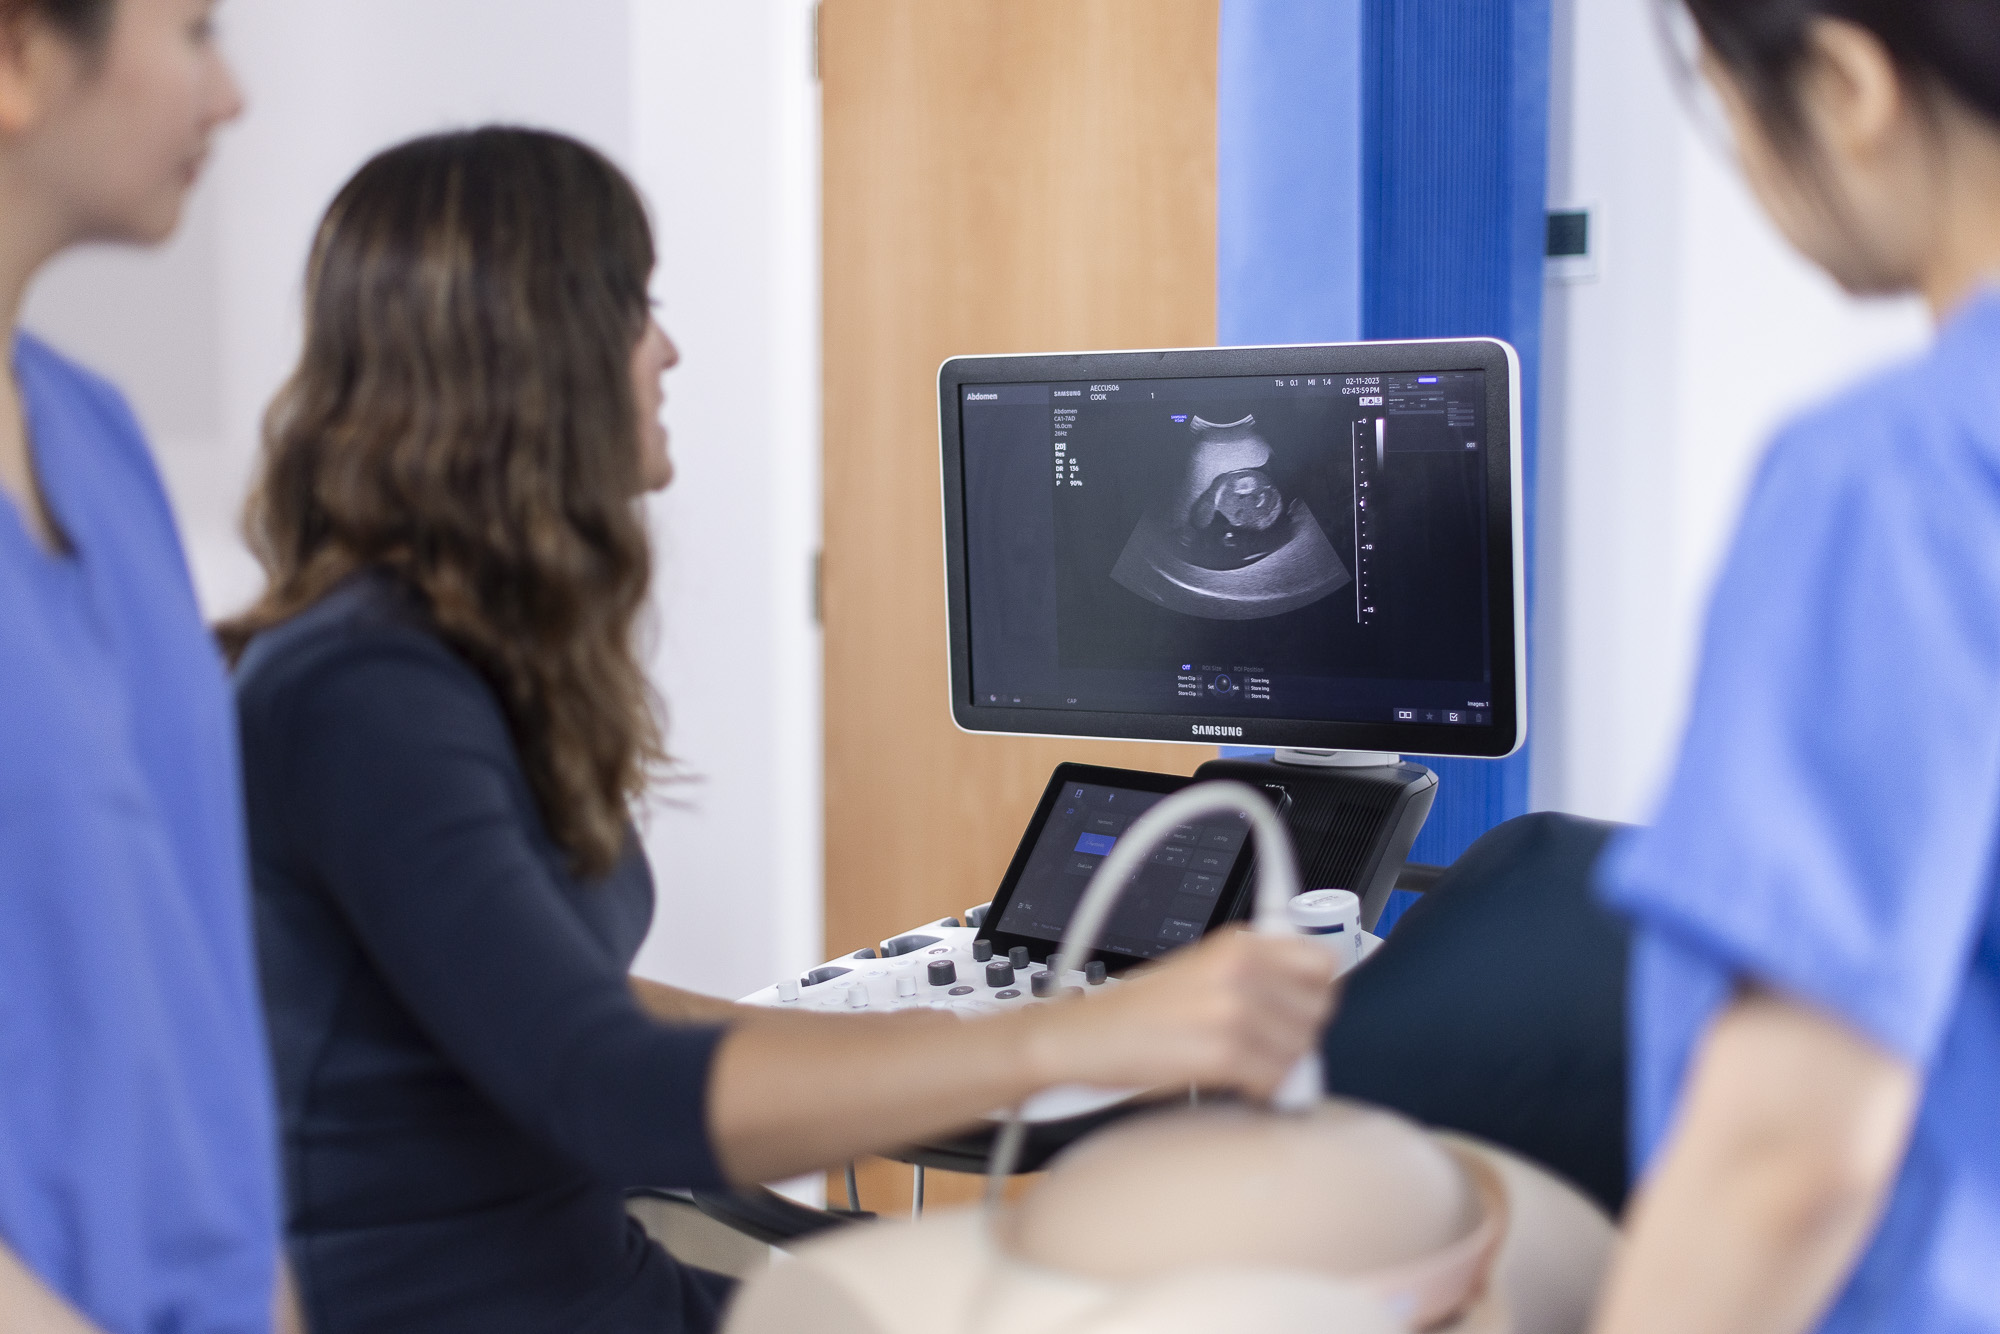 Ultrasound machine being used in a teaching setting